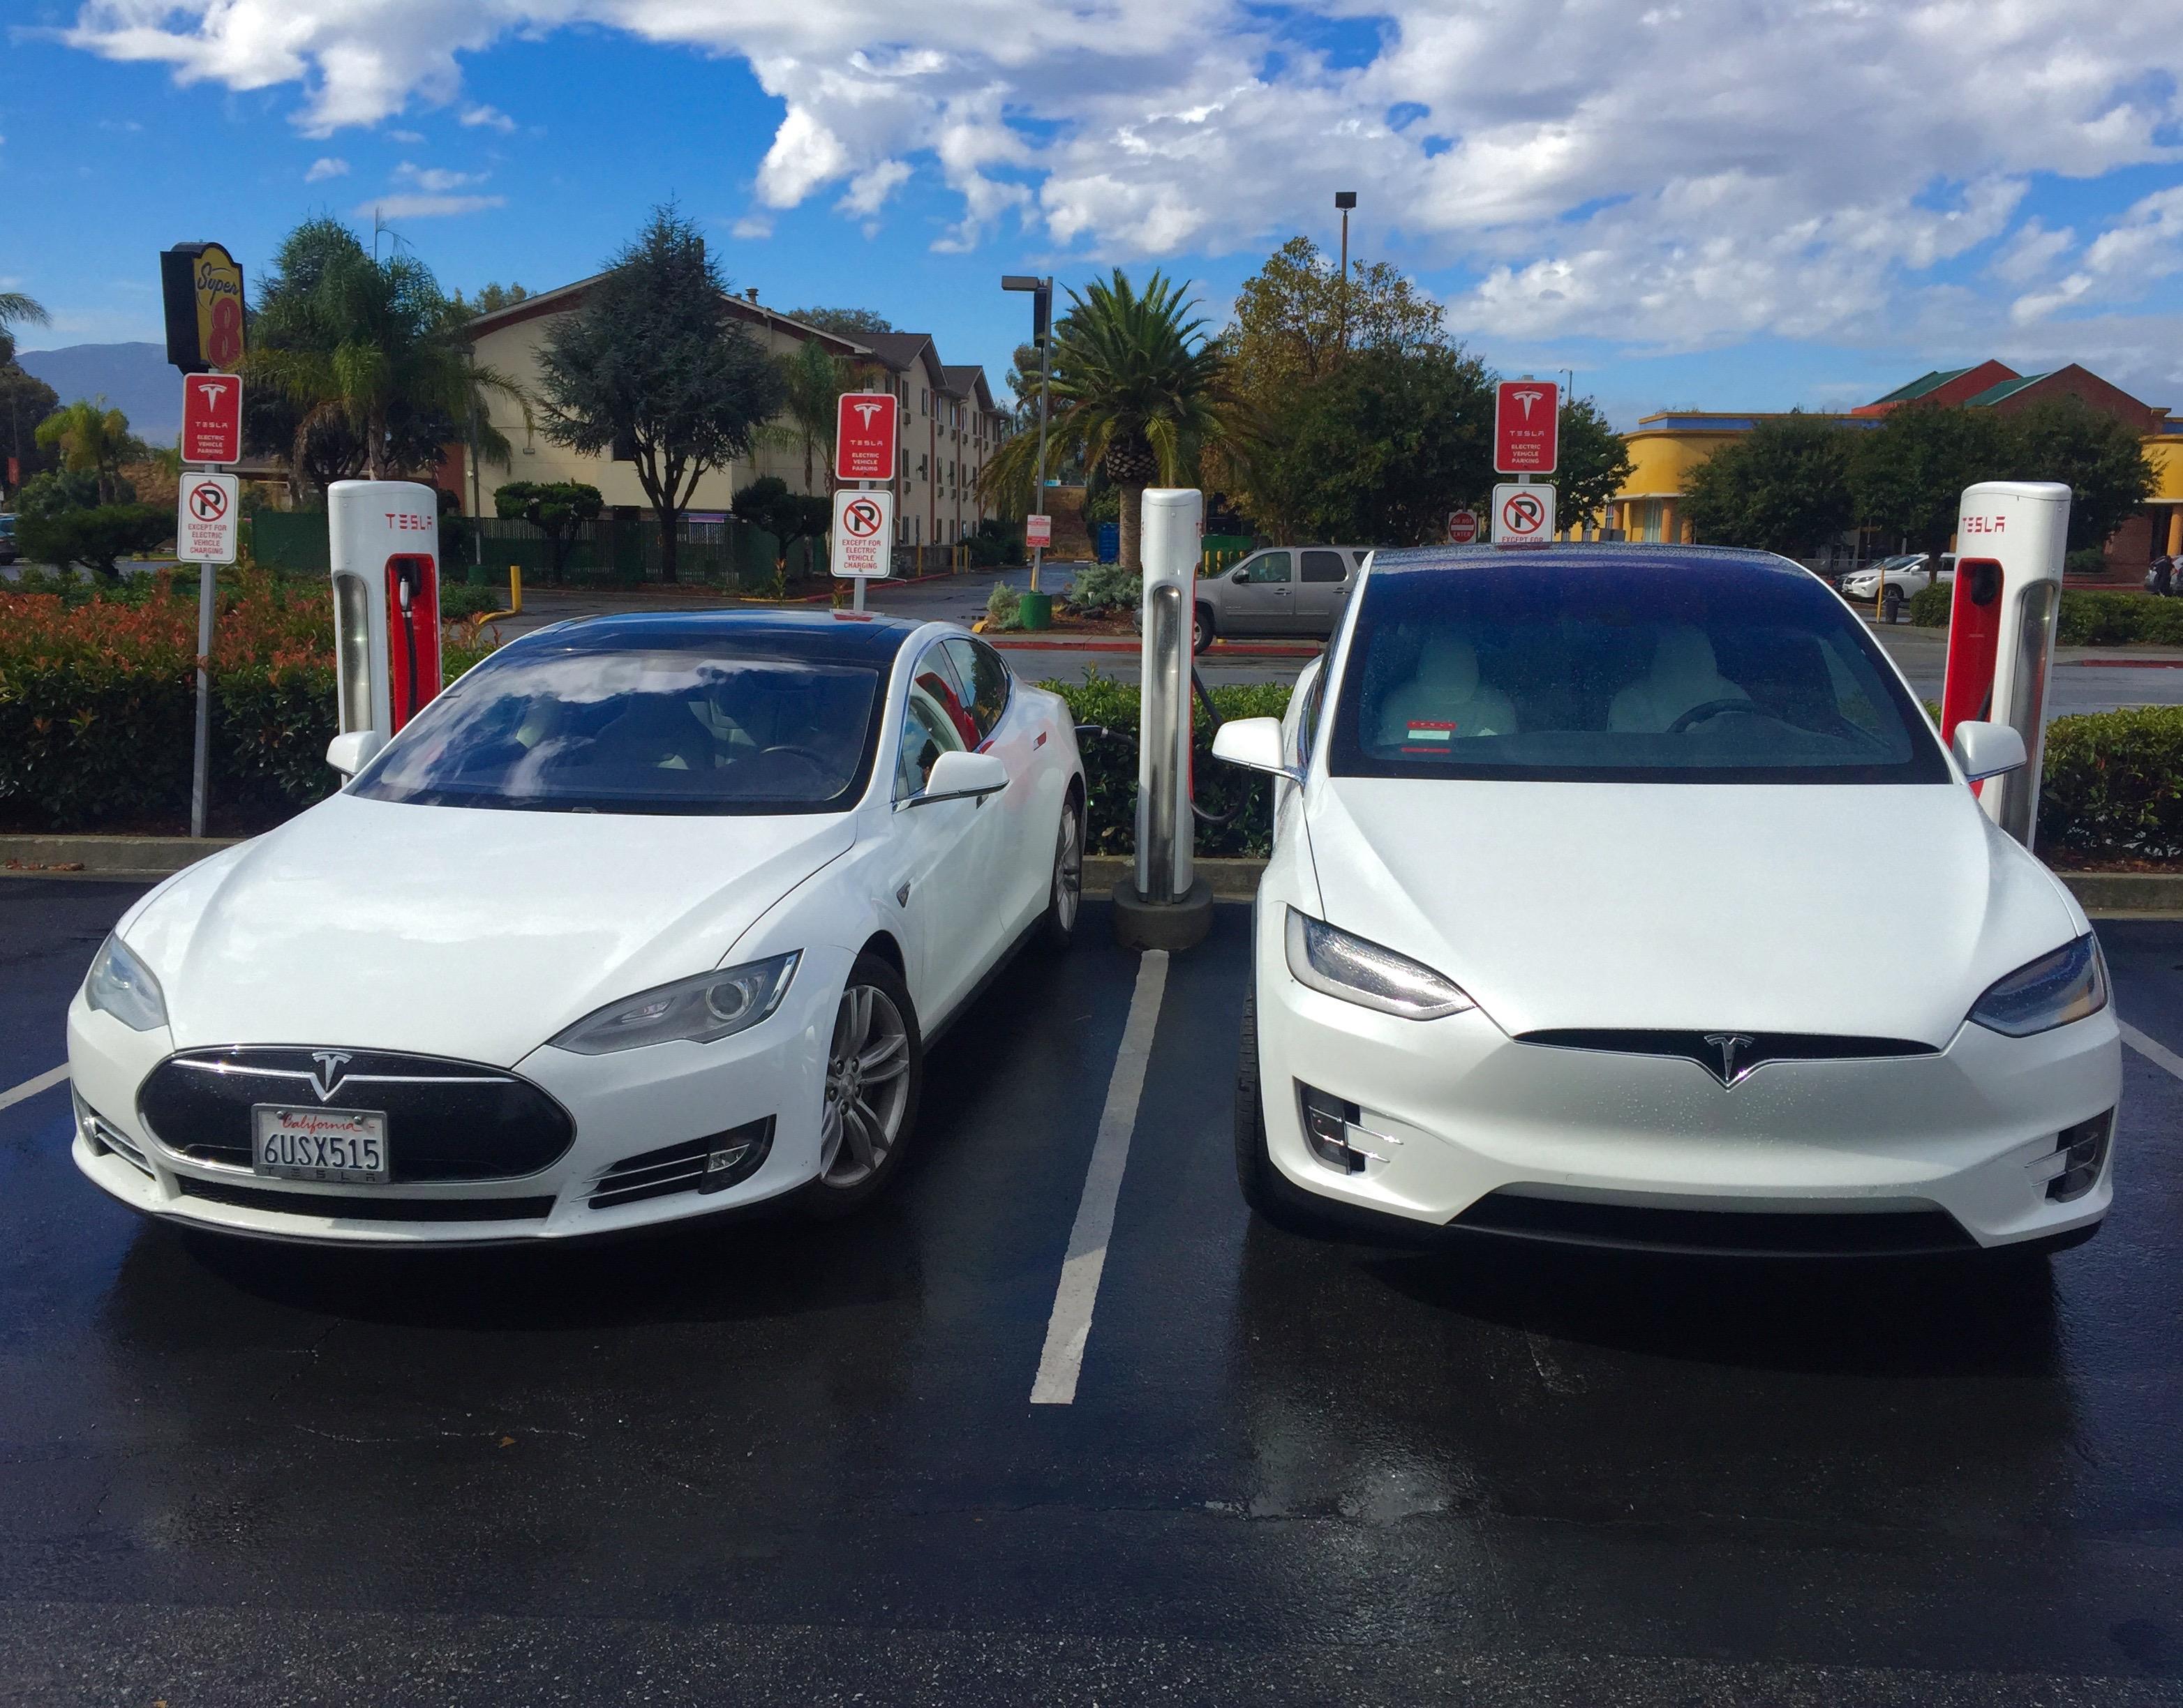 Dealing with Tesla: Always Check Your Delivery Date, Ask About Rebates, Consider Small Claims Court if Necessary